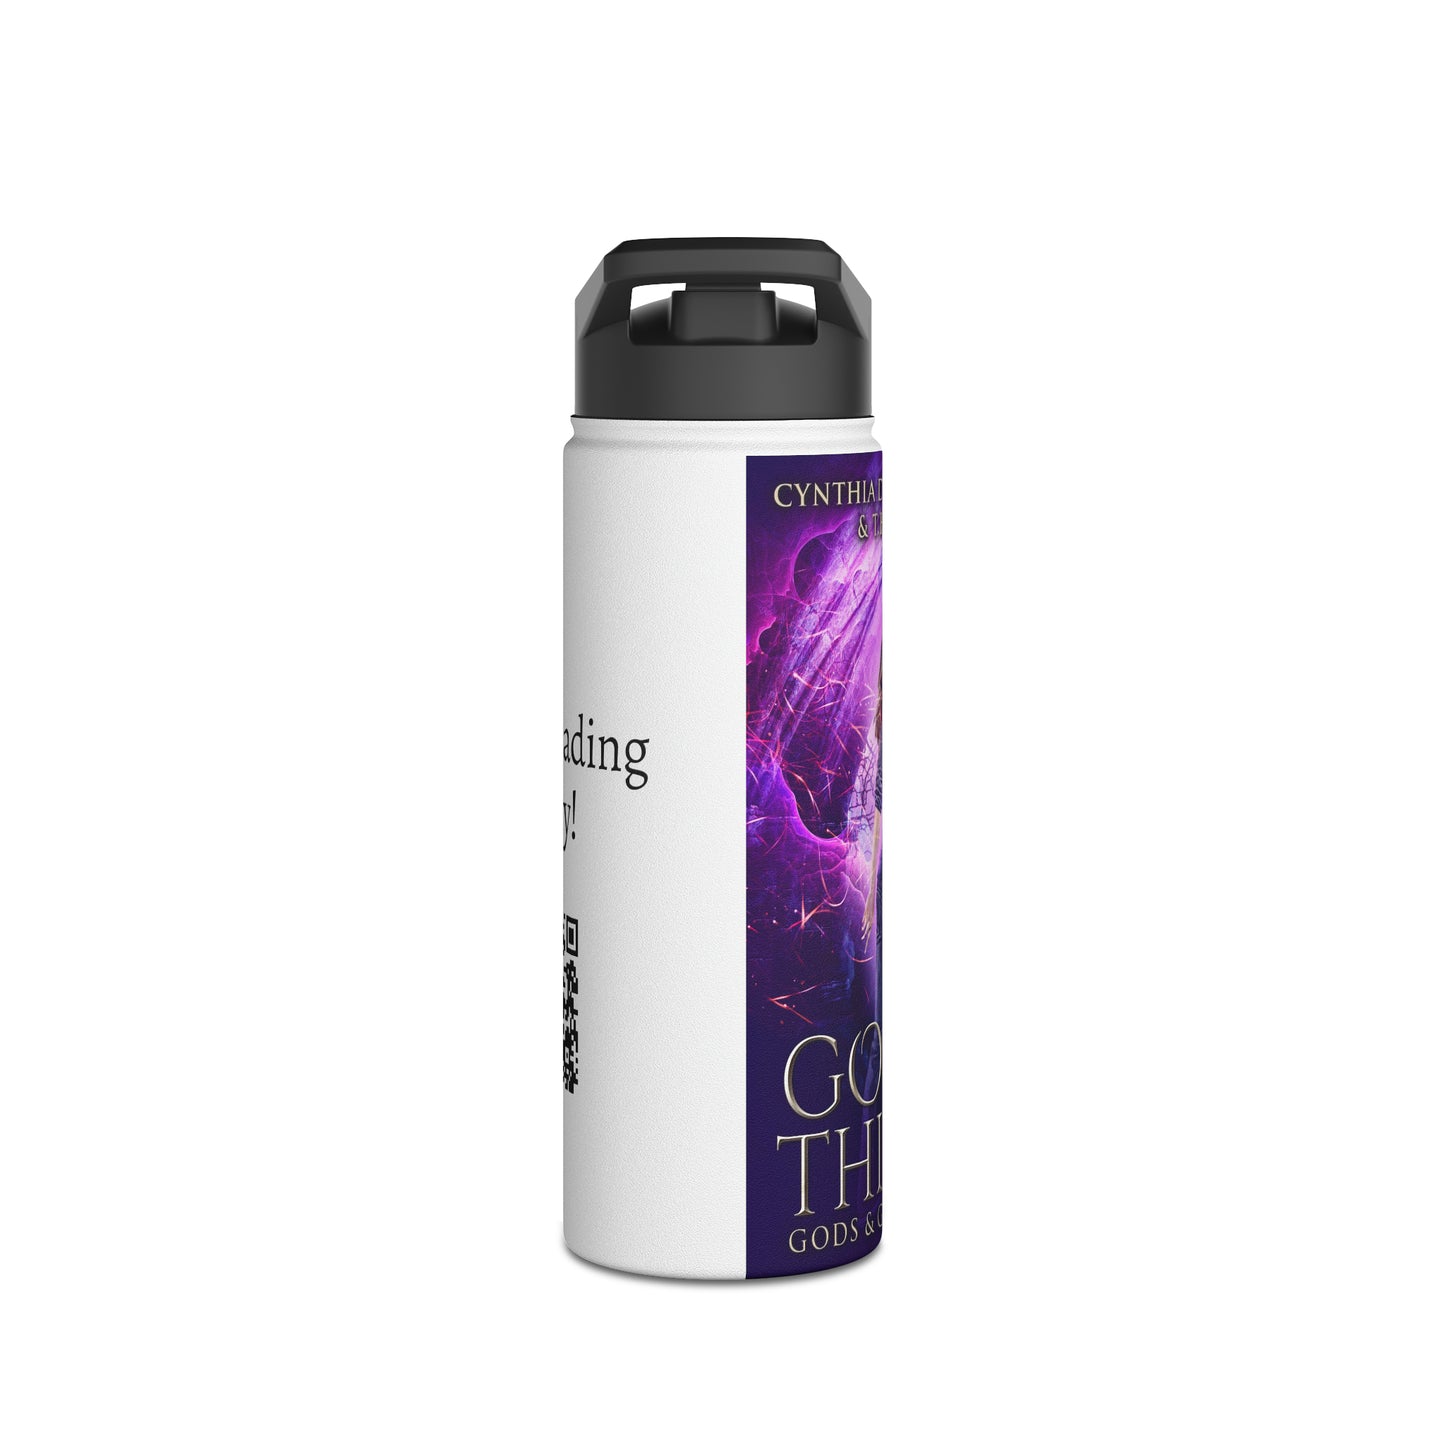 Gods & Thieves - Stainless Steel Water Bottle